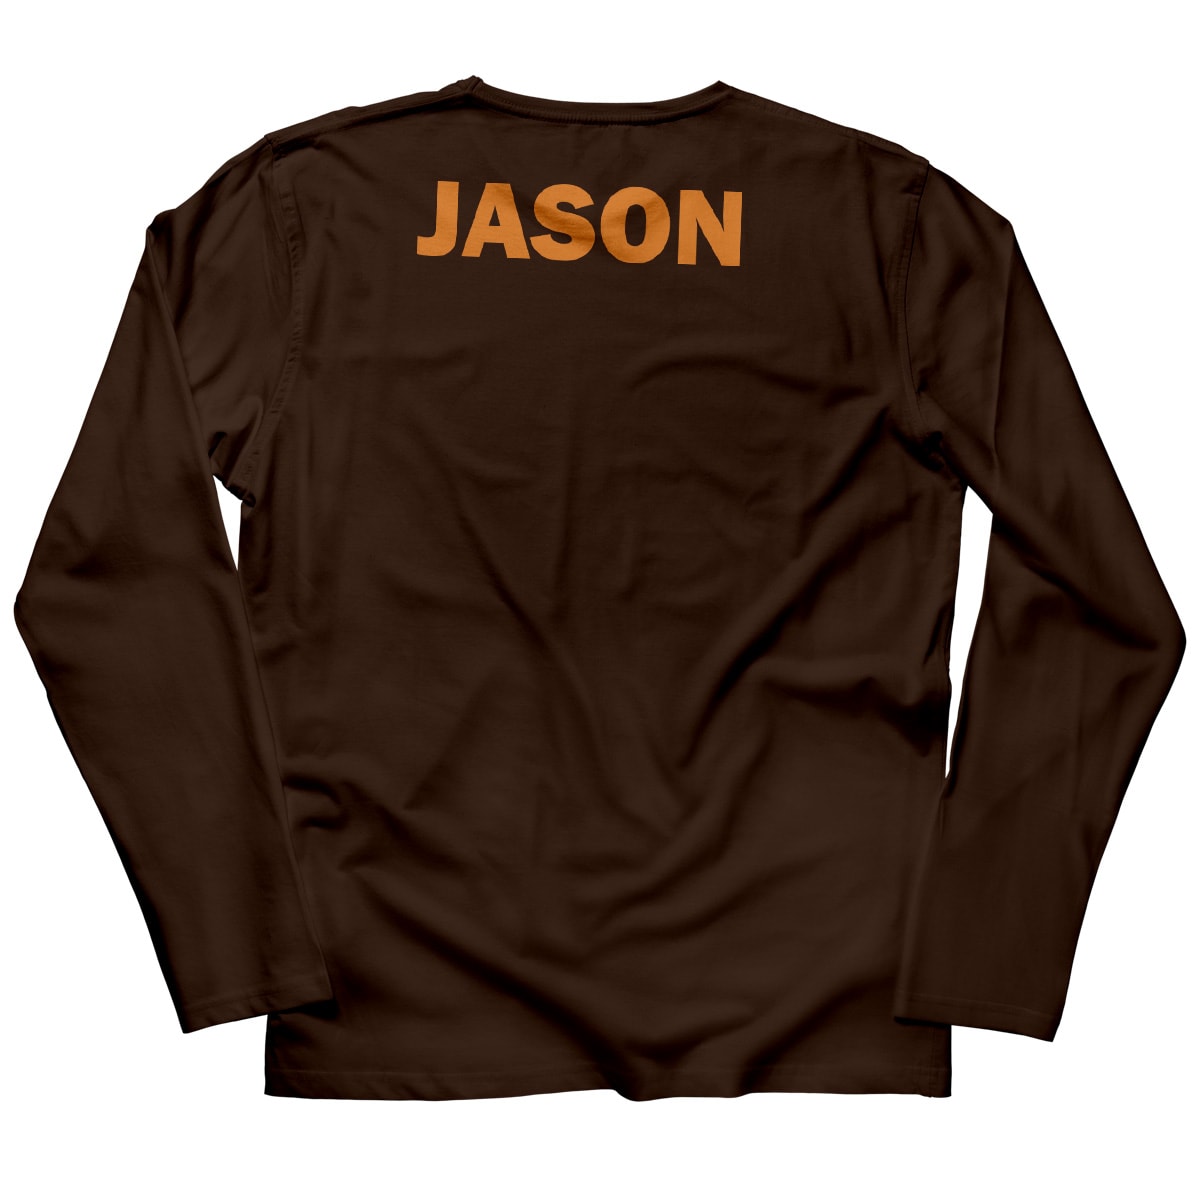 Boys brown thanksgiving tee shirt with name - Wimziy&Co.